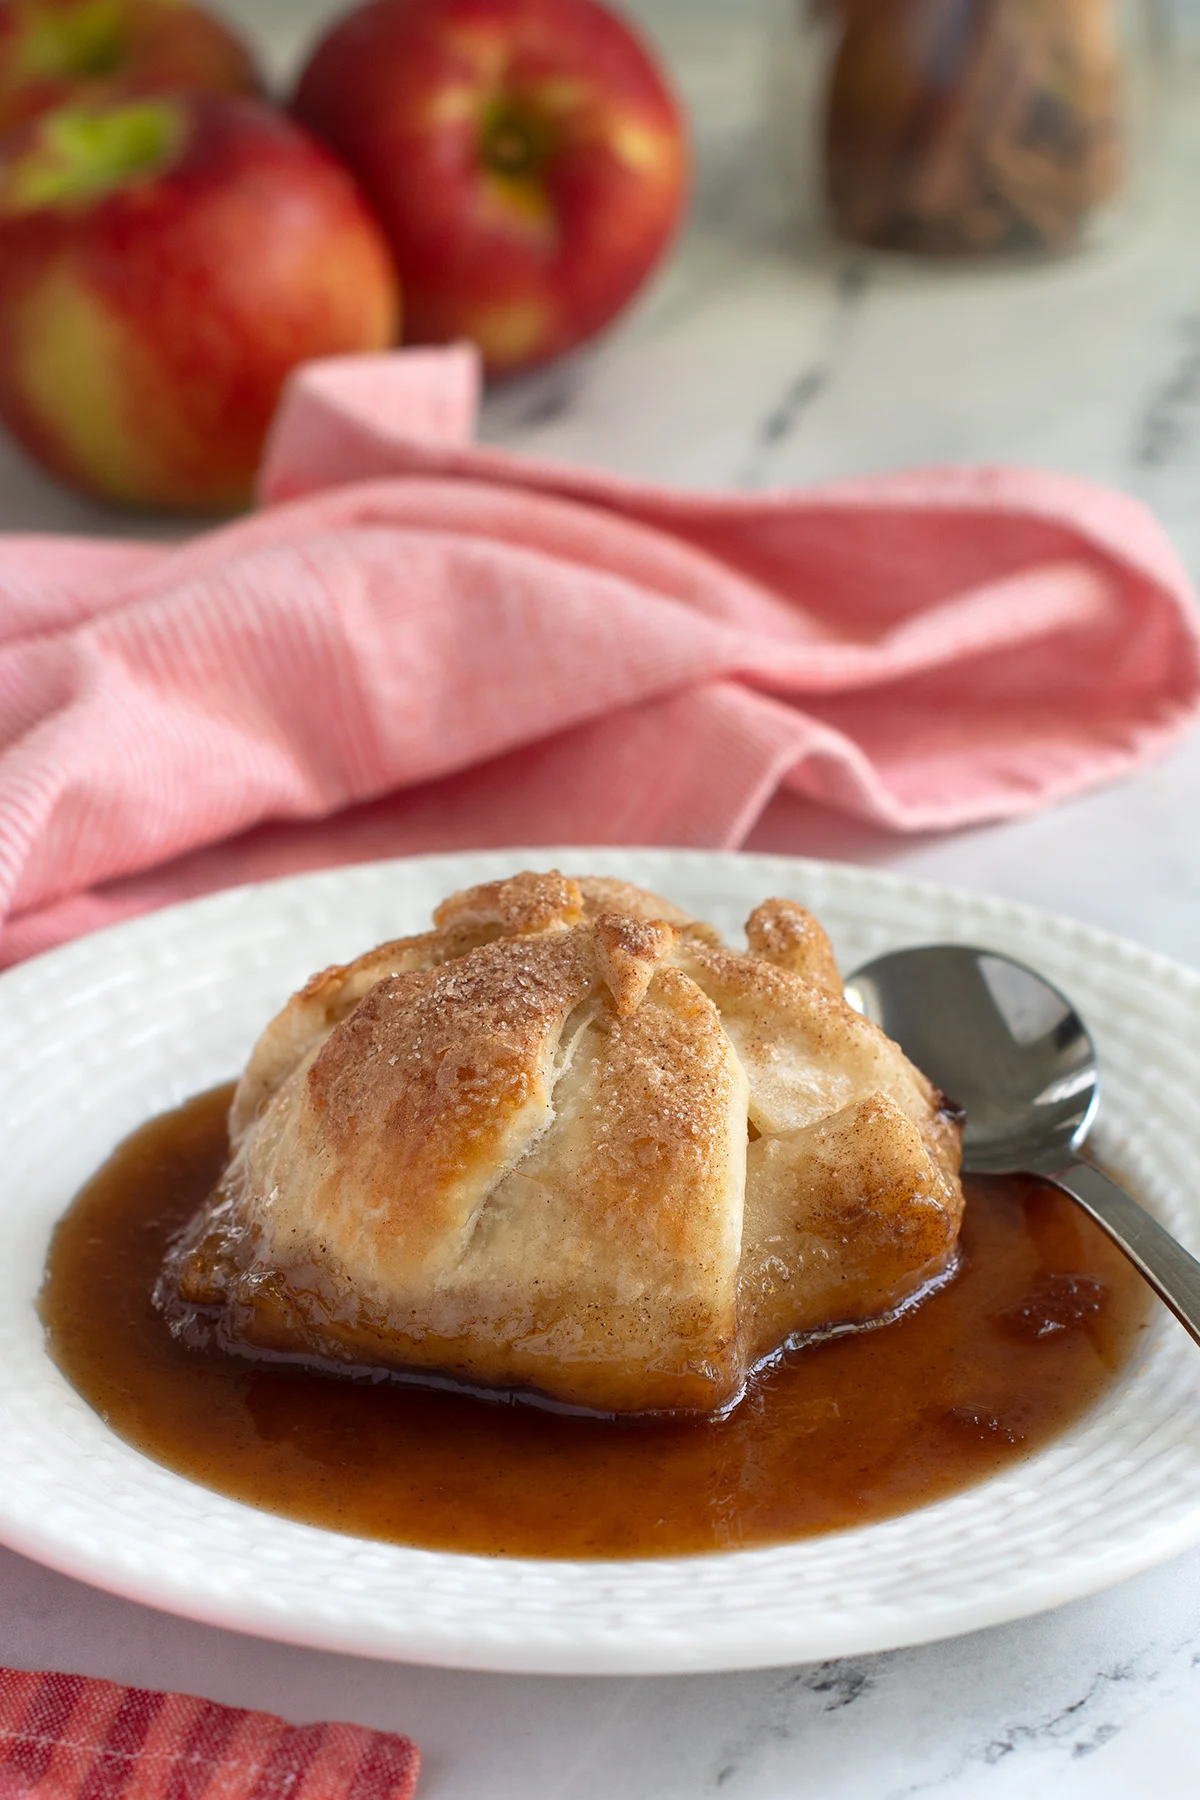 an apple dumpling on a white plate with sauce.